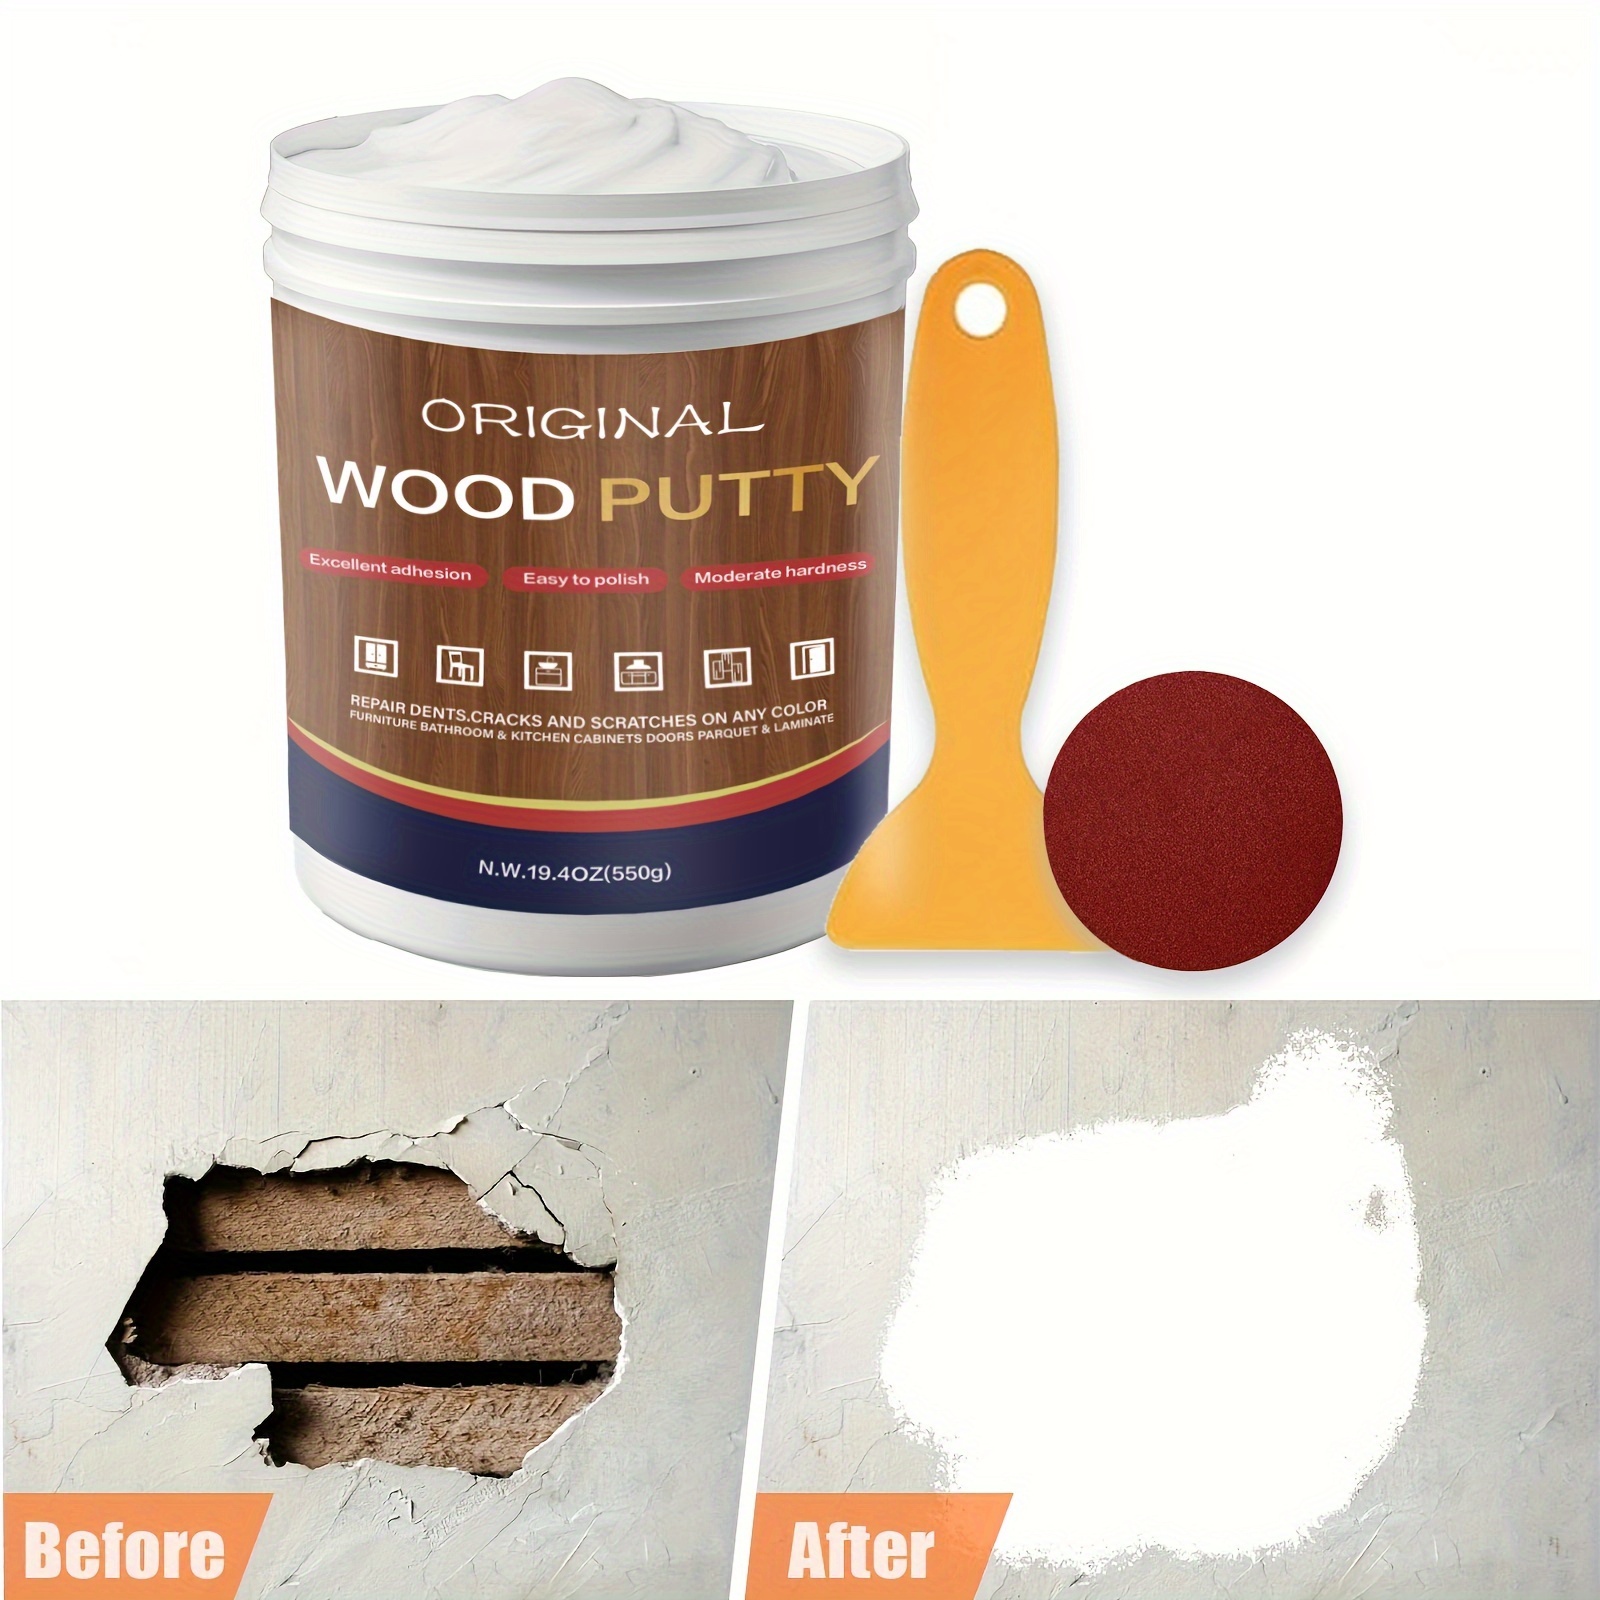  Weglau Wood Glue, Wood Adhesive,Instantly Strong  Adhesive,Suitable for Wood, Oak, Wooden Craft, Wooden Product, Wood  Edge,Paper, etc. - 20g : Arts, Crafts & Sewing